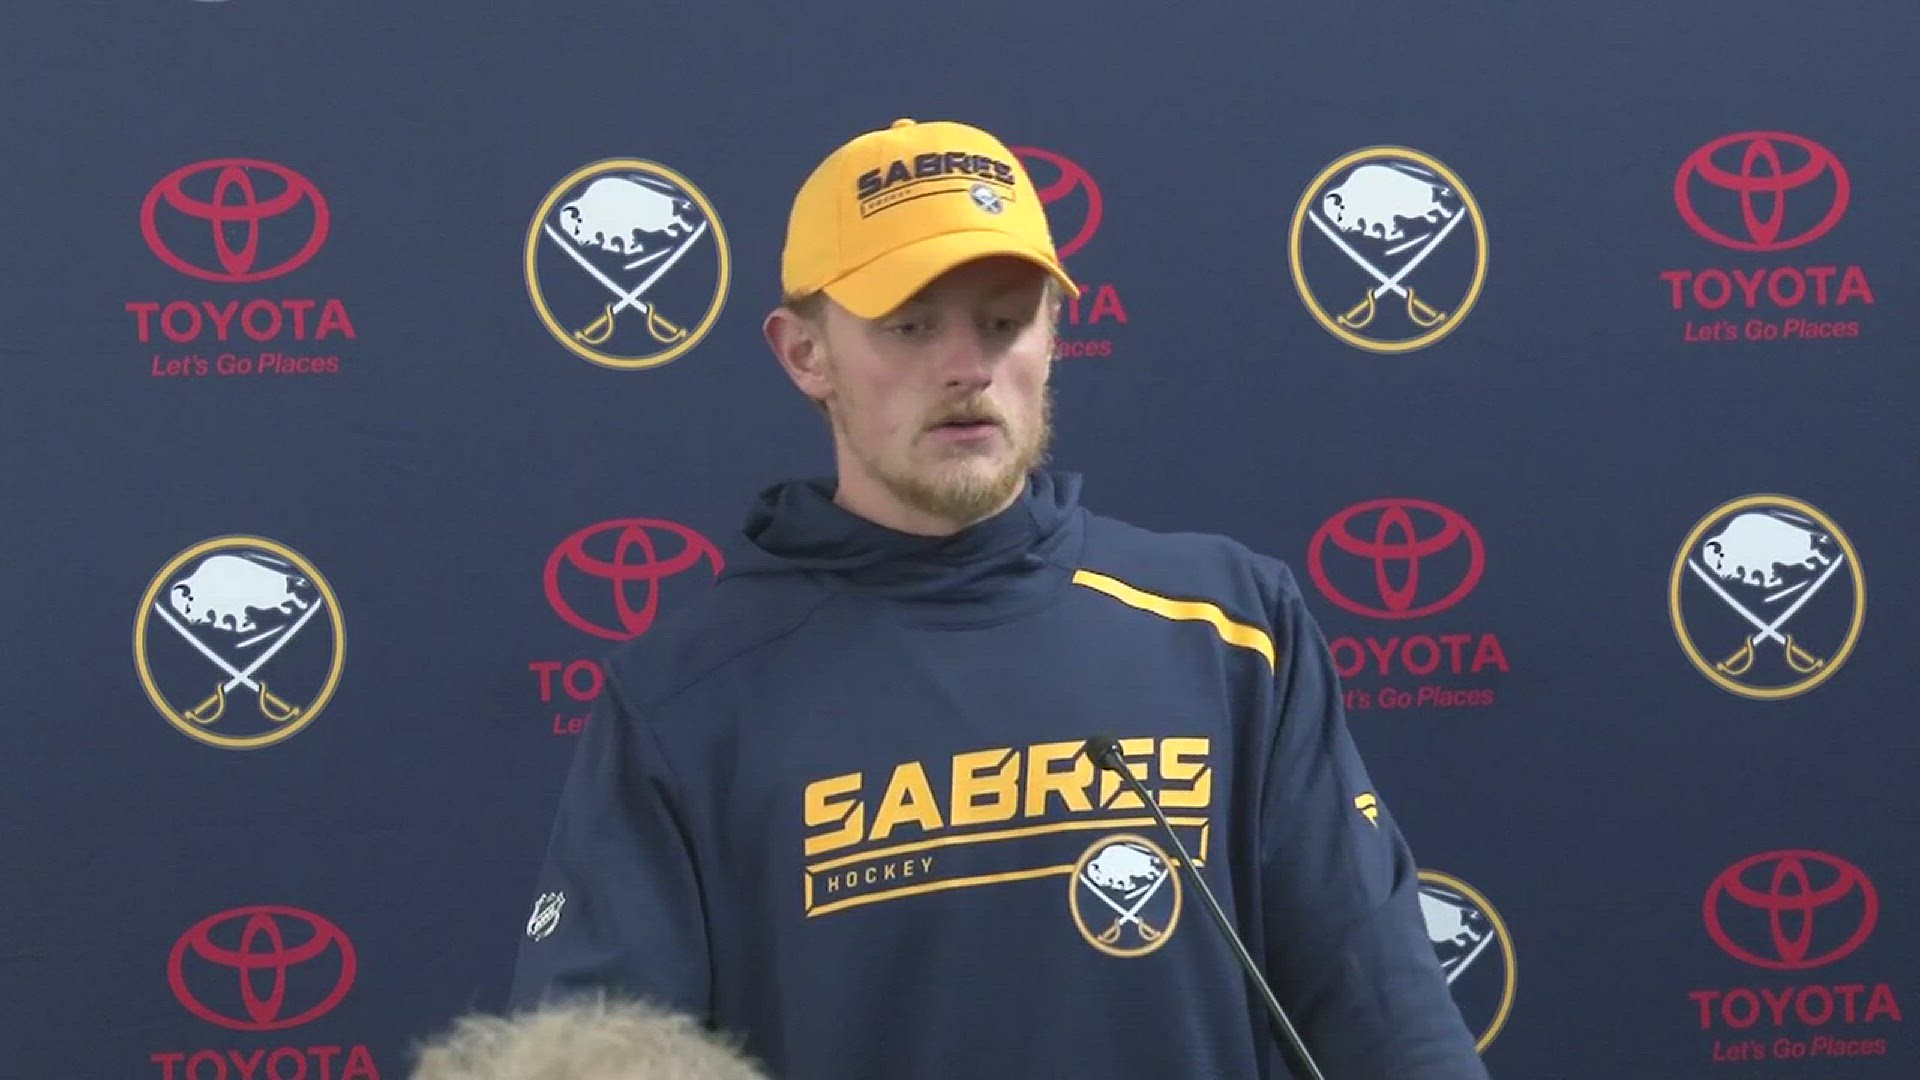 The Sabres, a team that got an off season overhaul, have a fresh positive outlook as training camp gets underway.